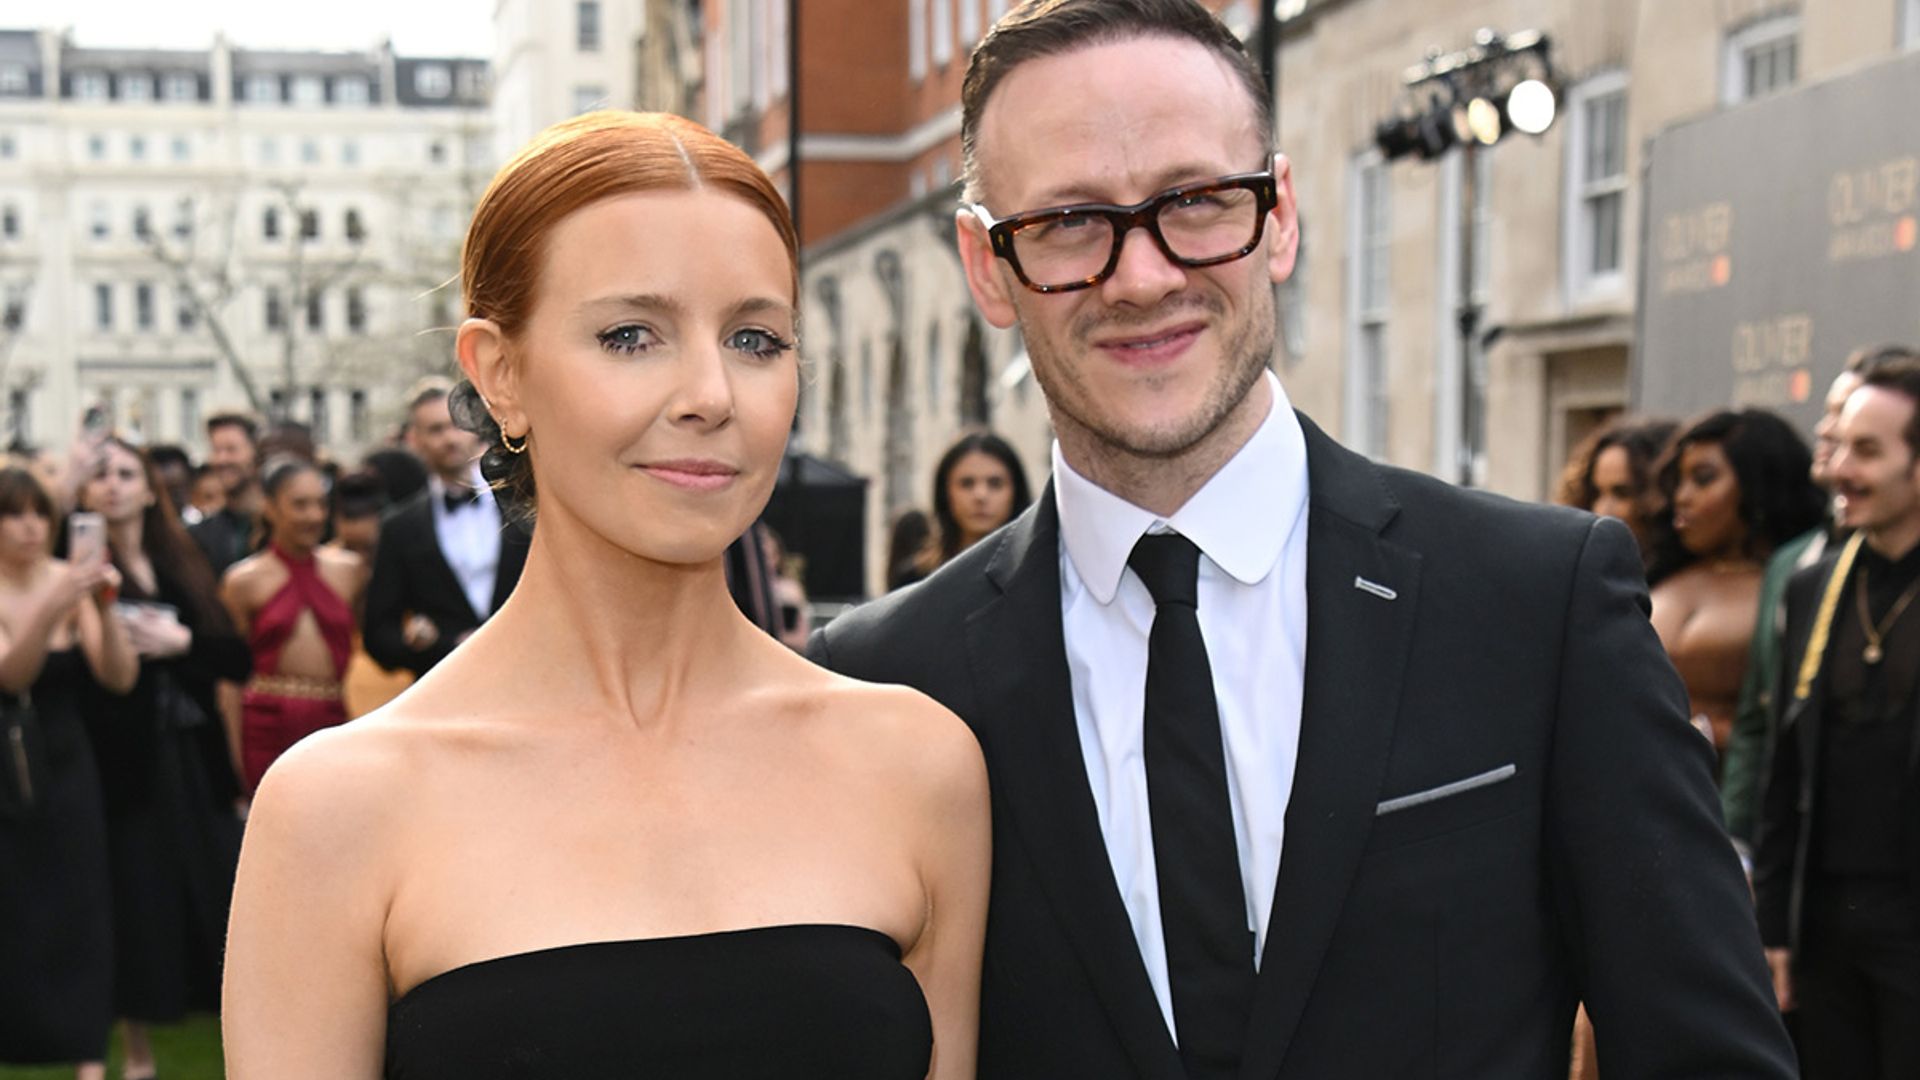 Stacey Dooley stuns in sensational mini-dress – Kevin Clifton reacts